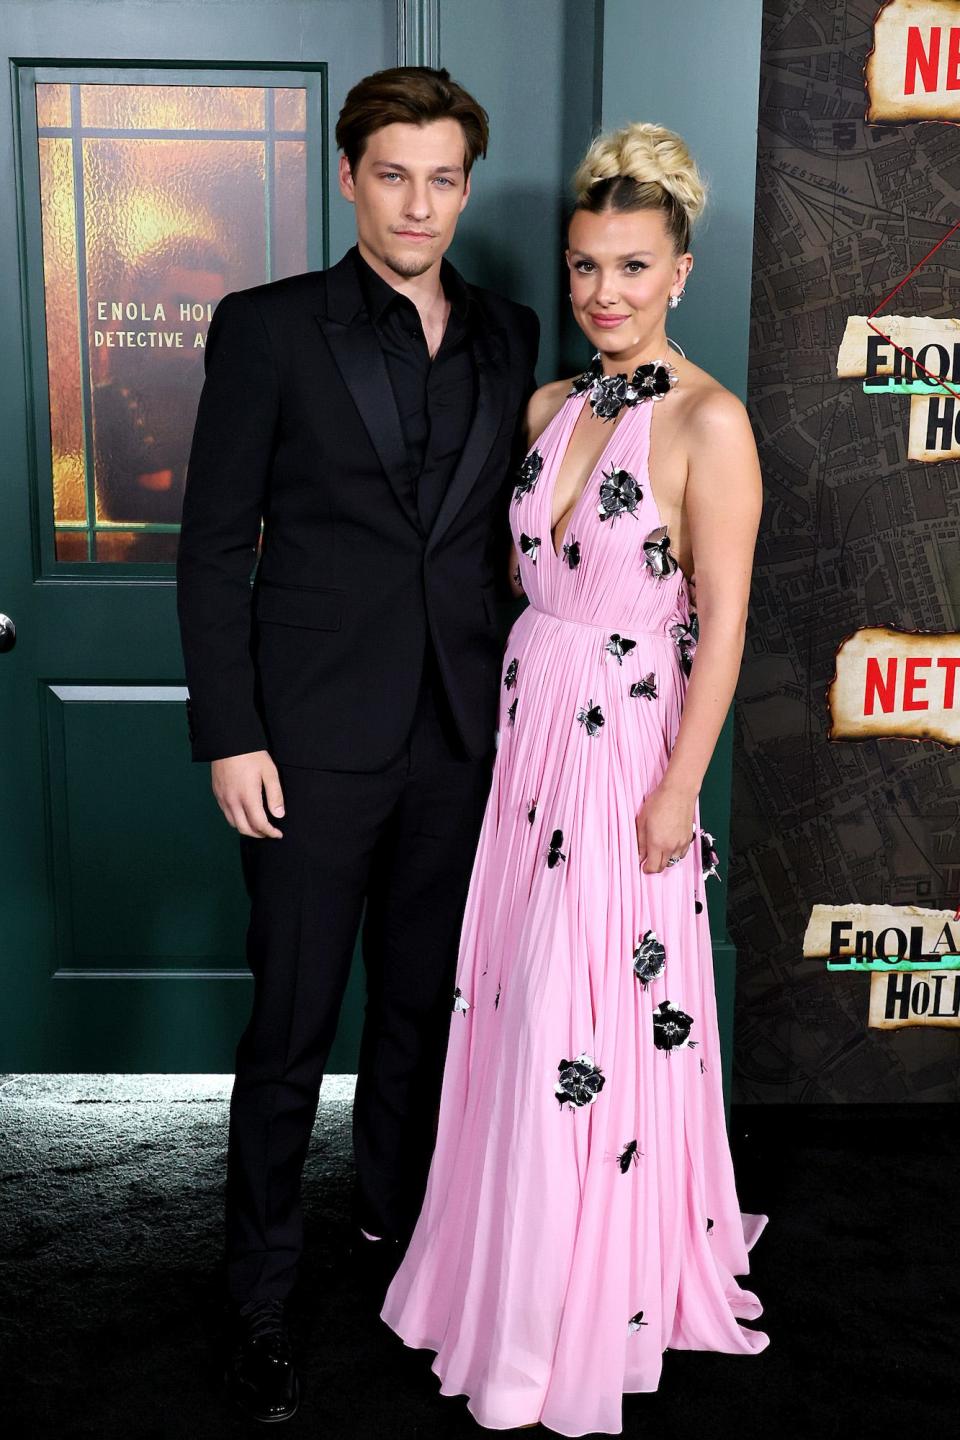 Jake Bongiovi and Millie Bobby Brown at the "Enola Holmes 2" premiere on October 27, 2022.